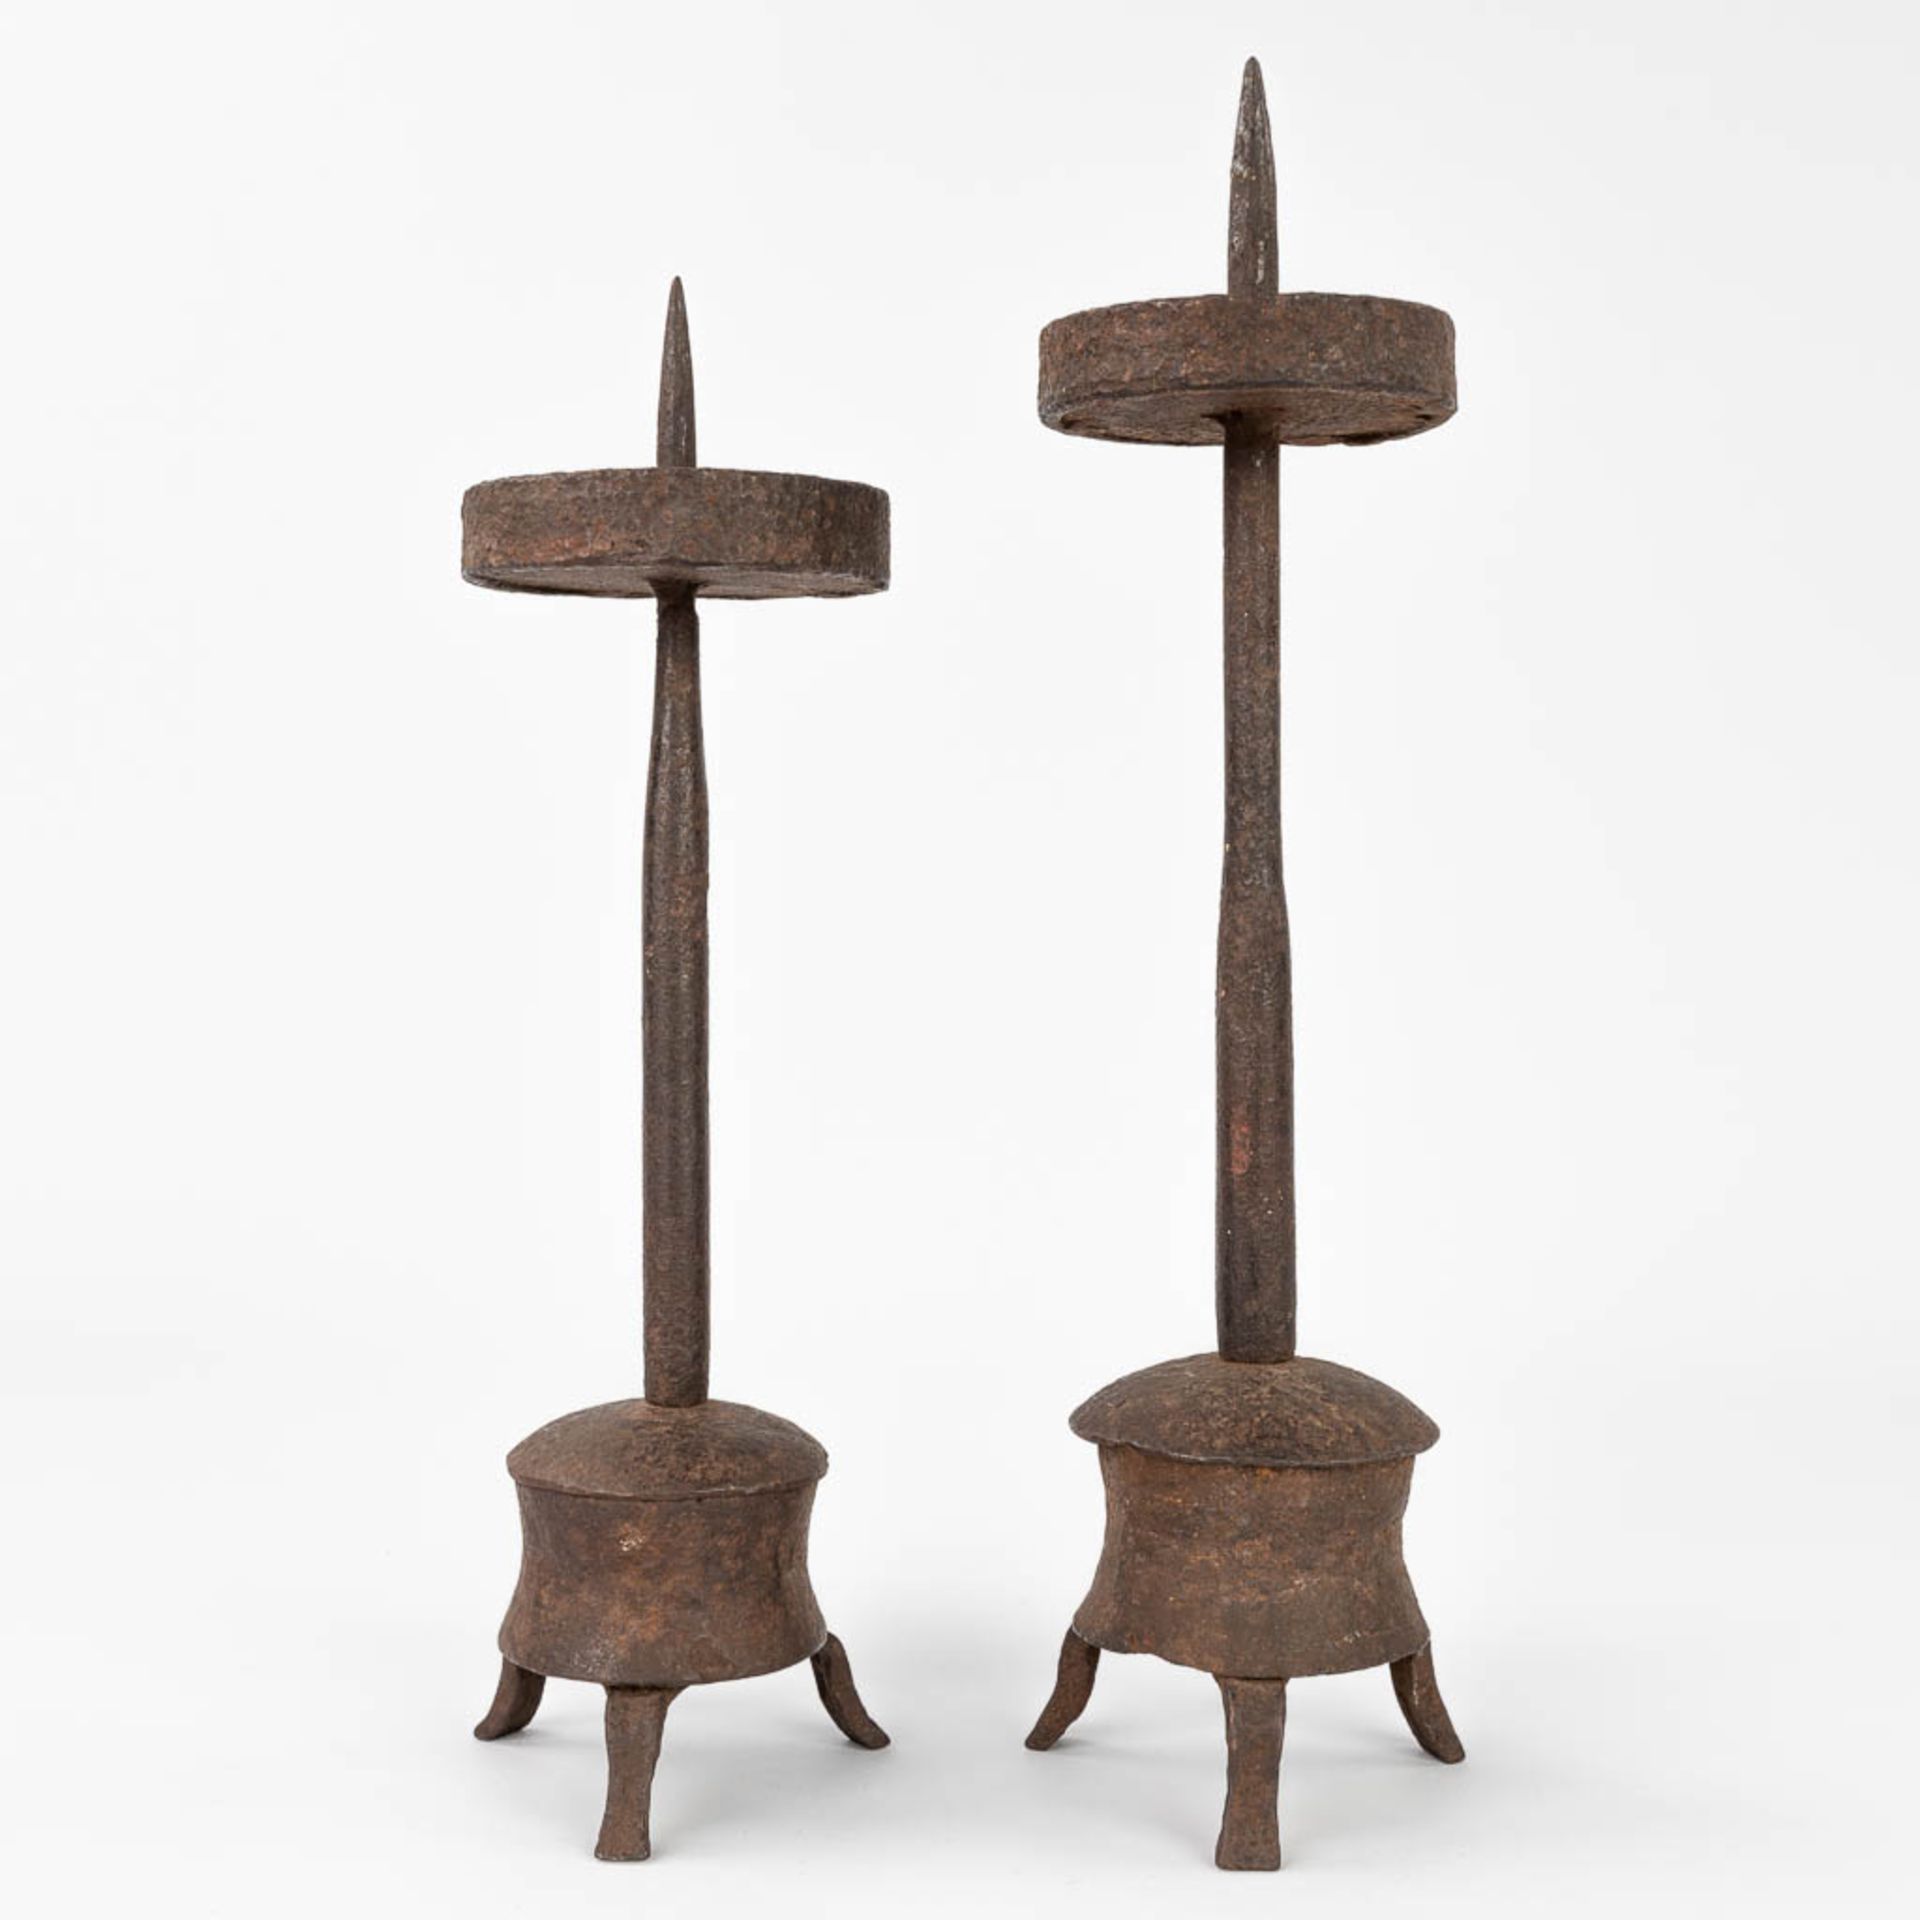 A pair of antique candlesticks made of wrought iron. Probably made in Southern Europe. (H:34 cm) - Image 6 of 16